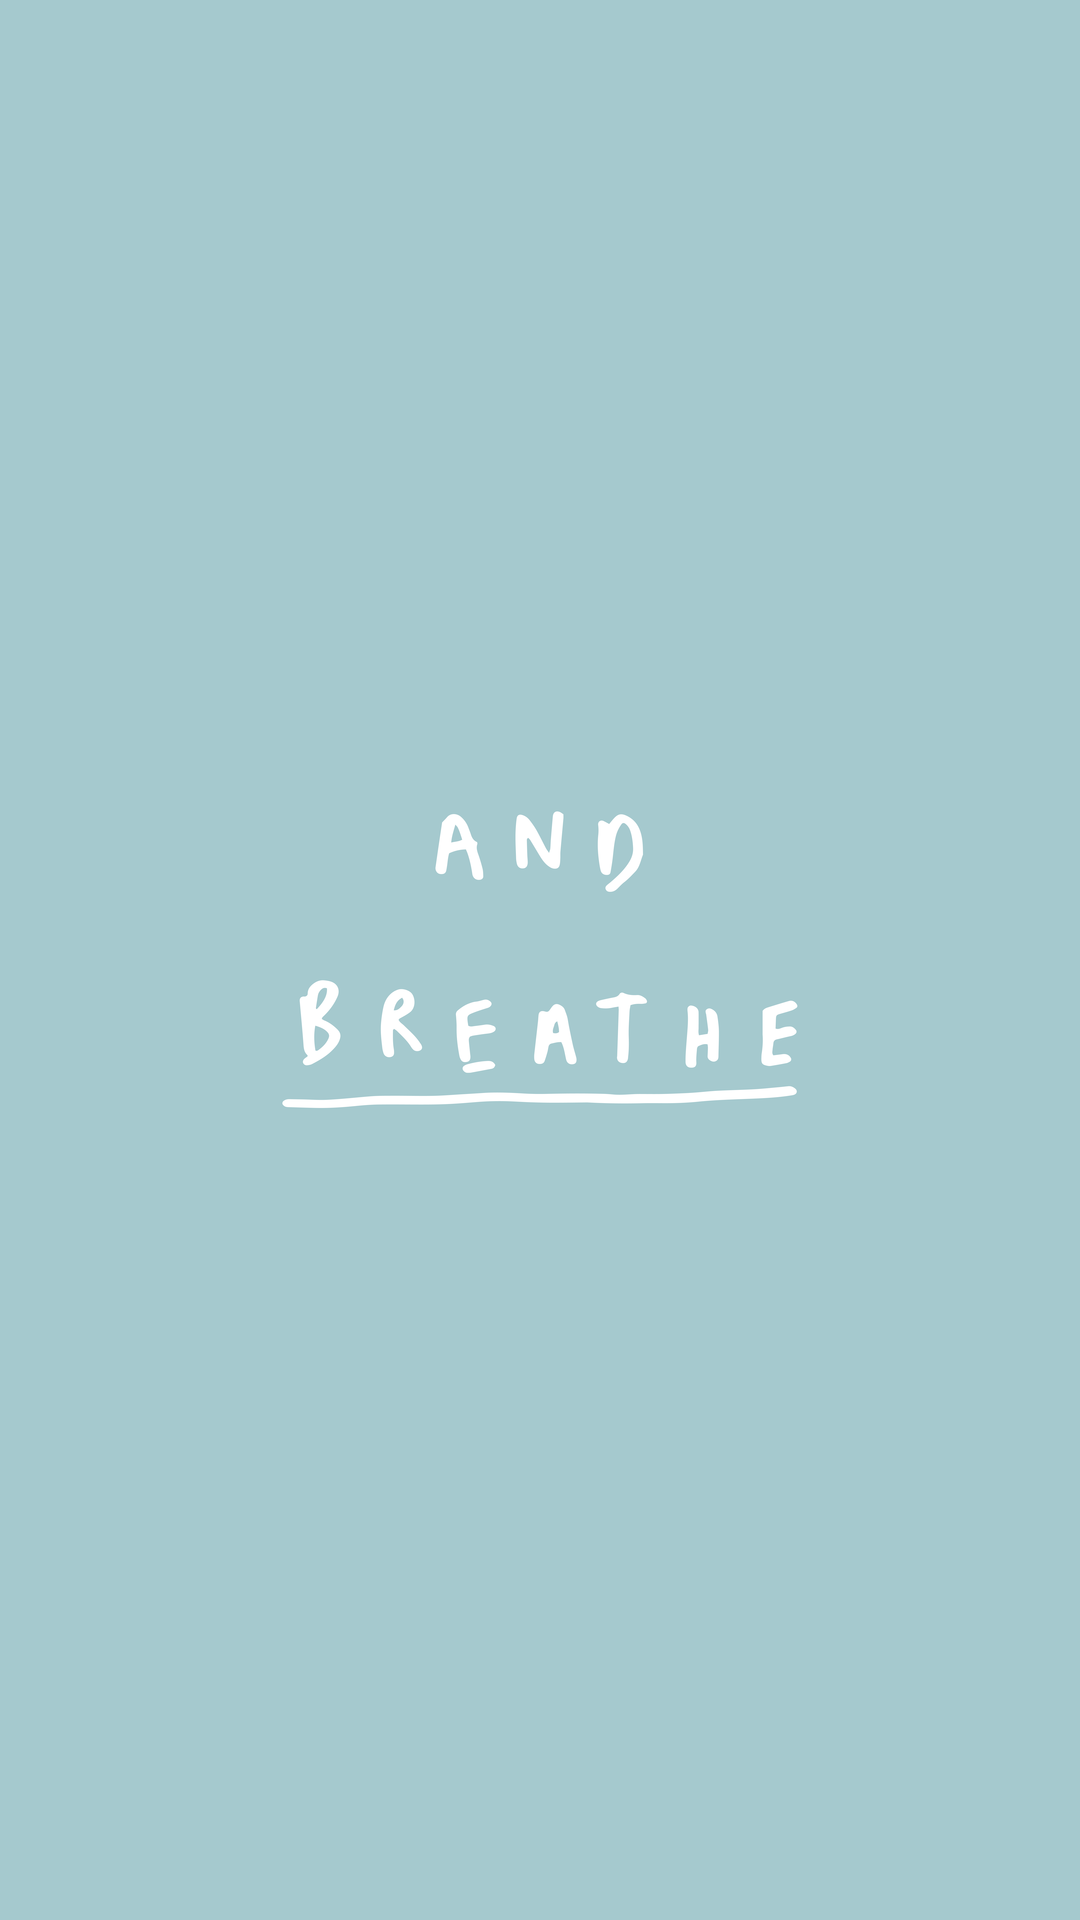 Breathe Phone Wallpapers - Top Free Breathe Phone Backgrounds ...